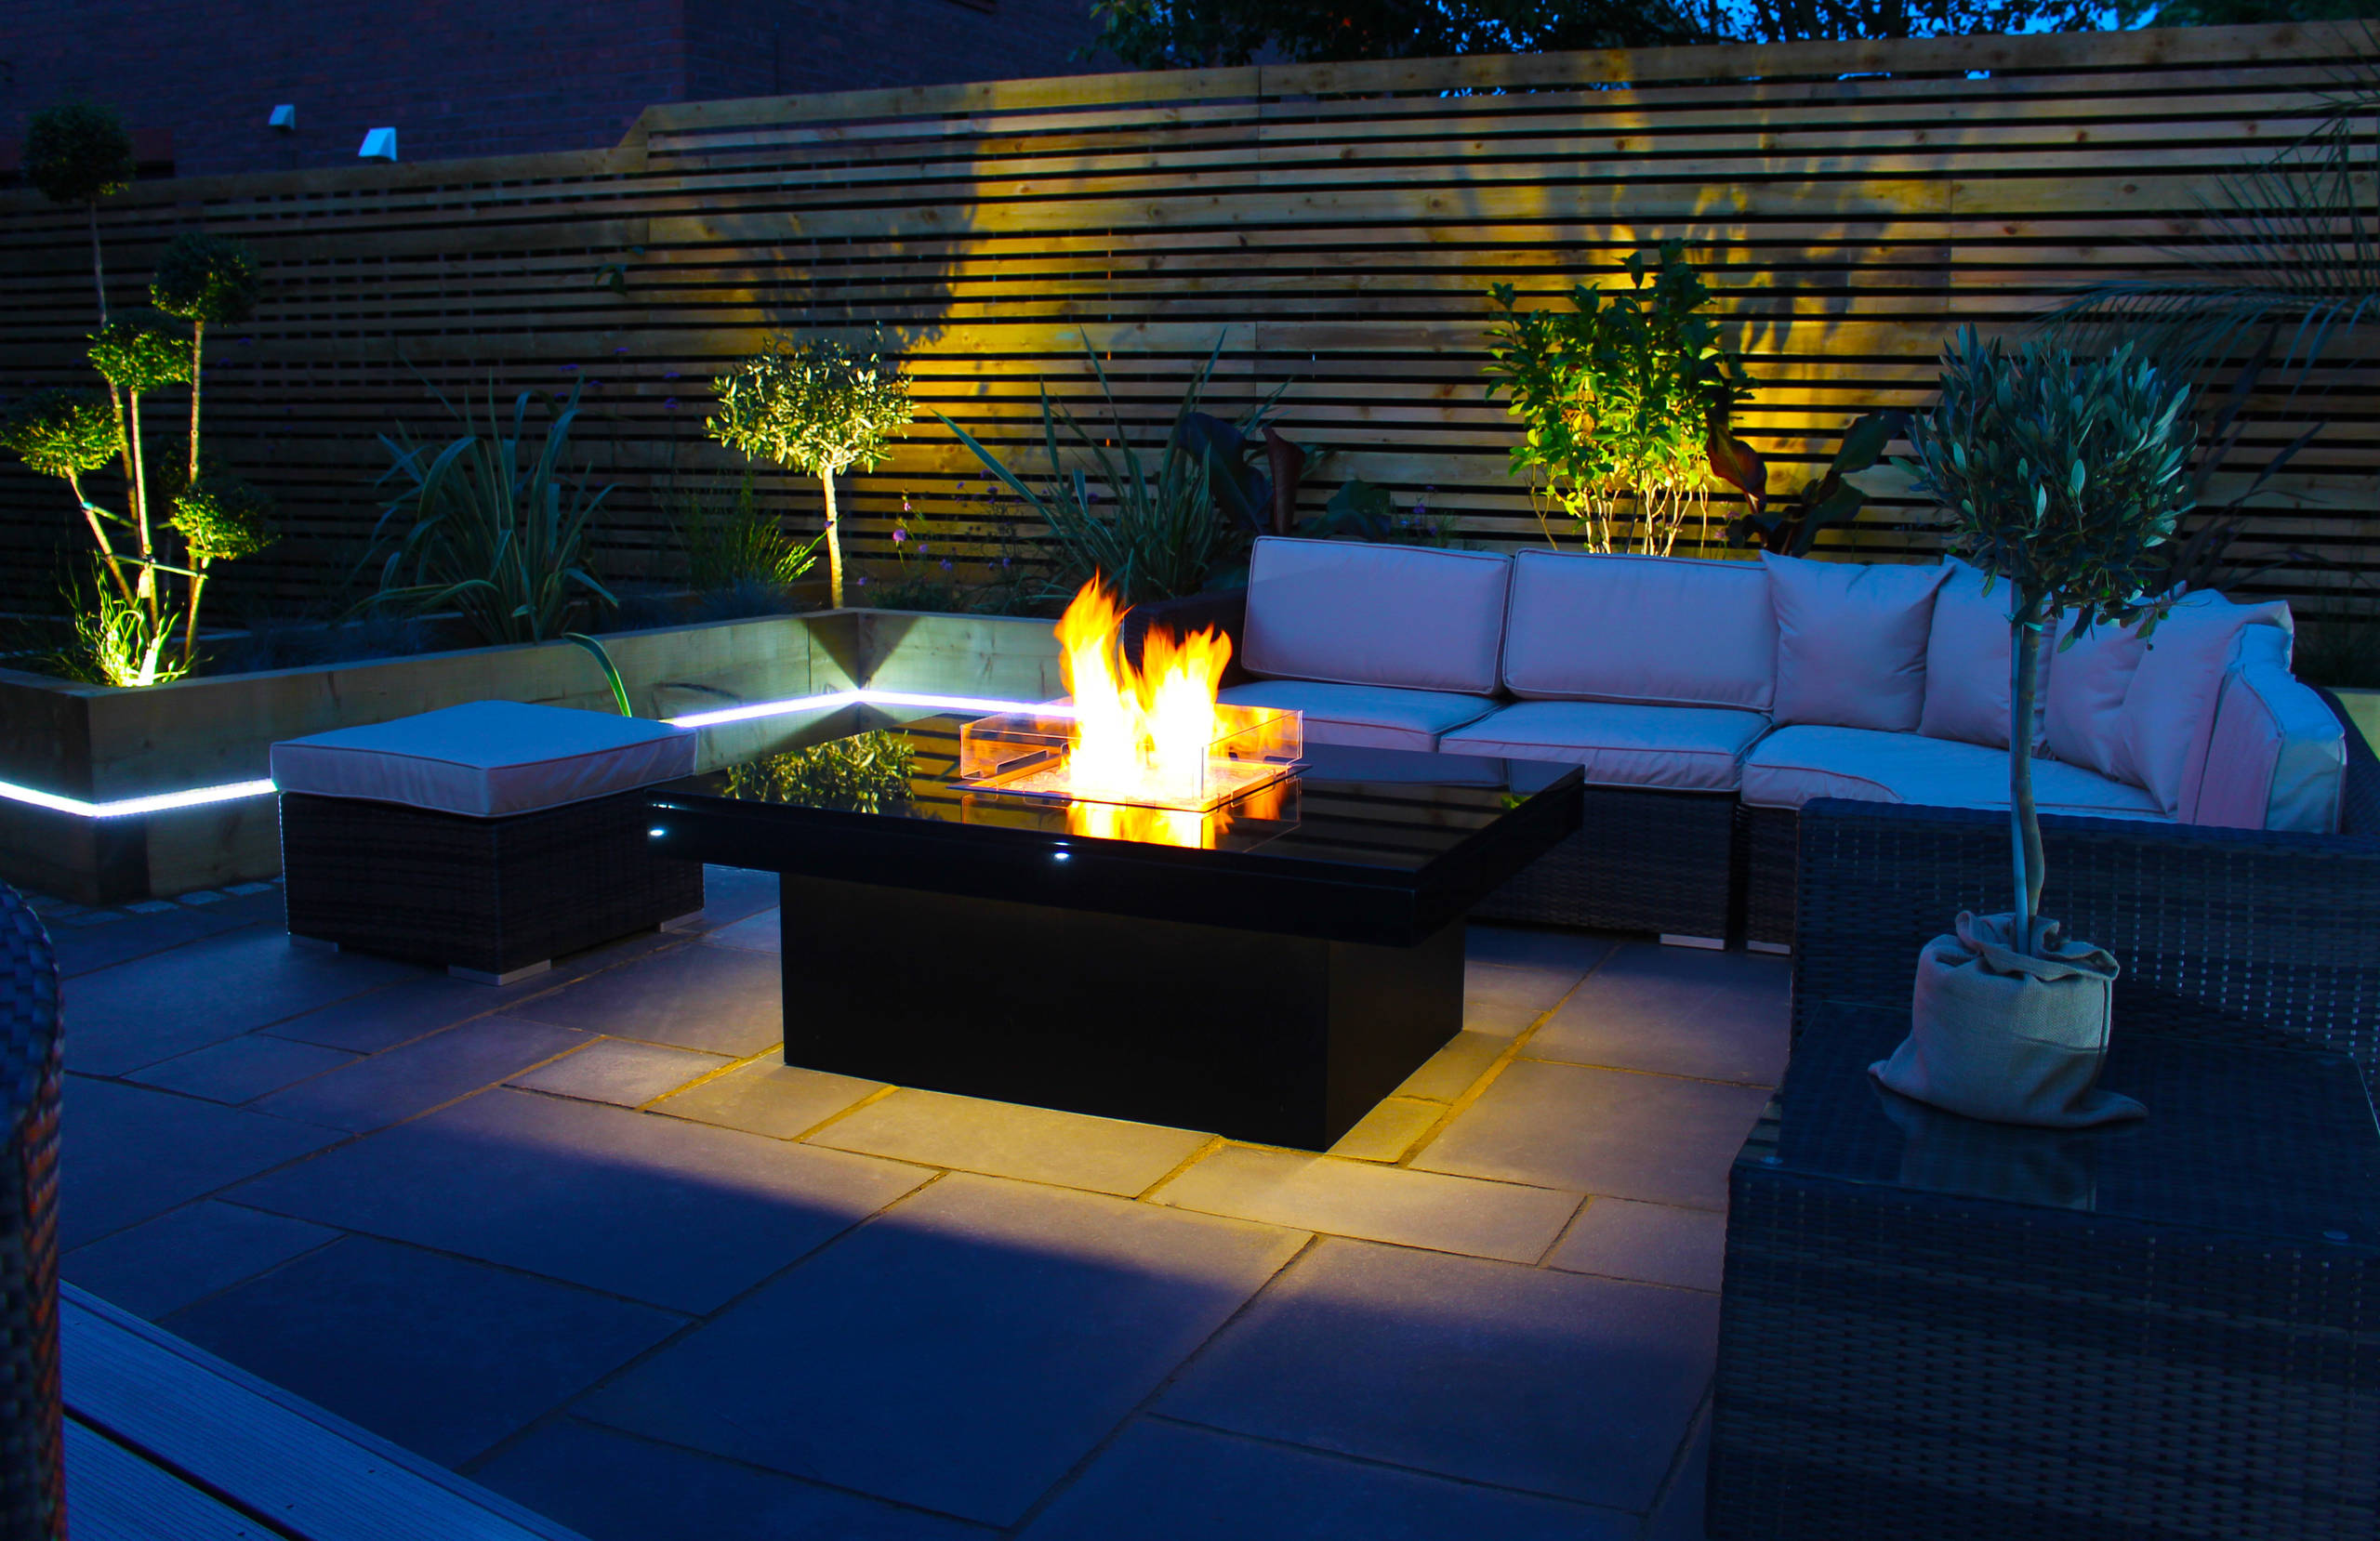 Fire Pit Table Ideas For Your Garden, Patio Fire Pit Table Ideas